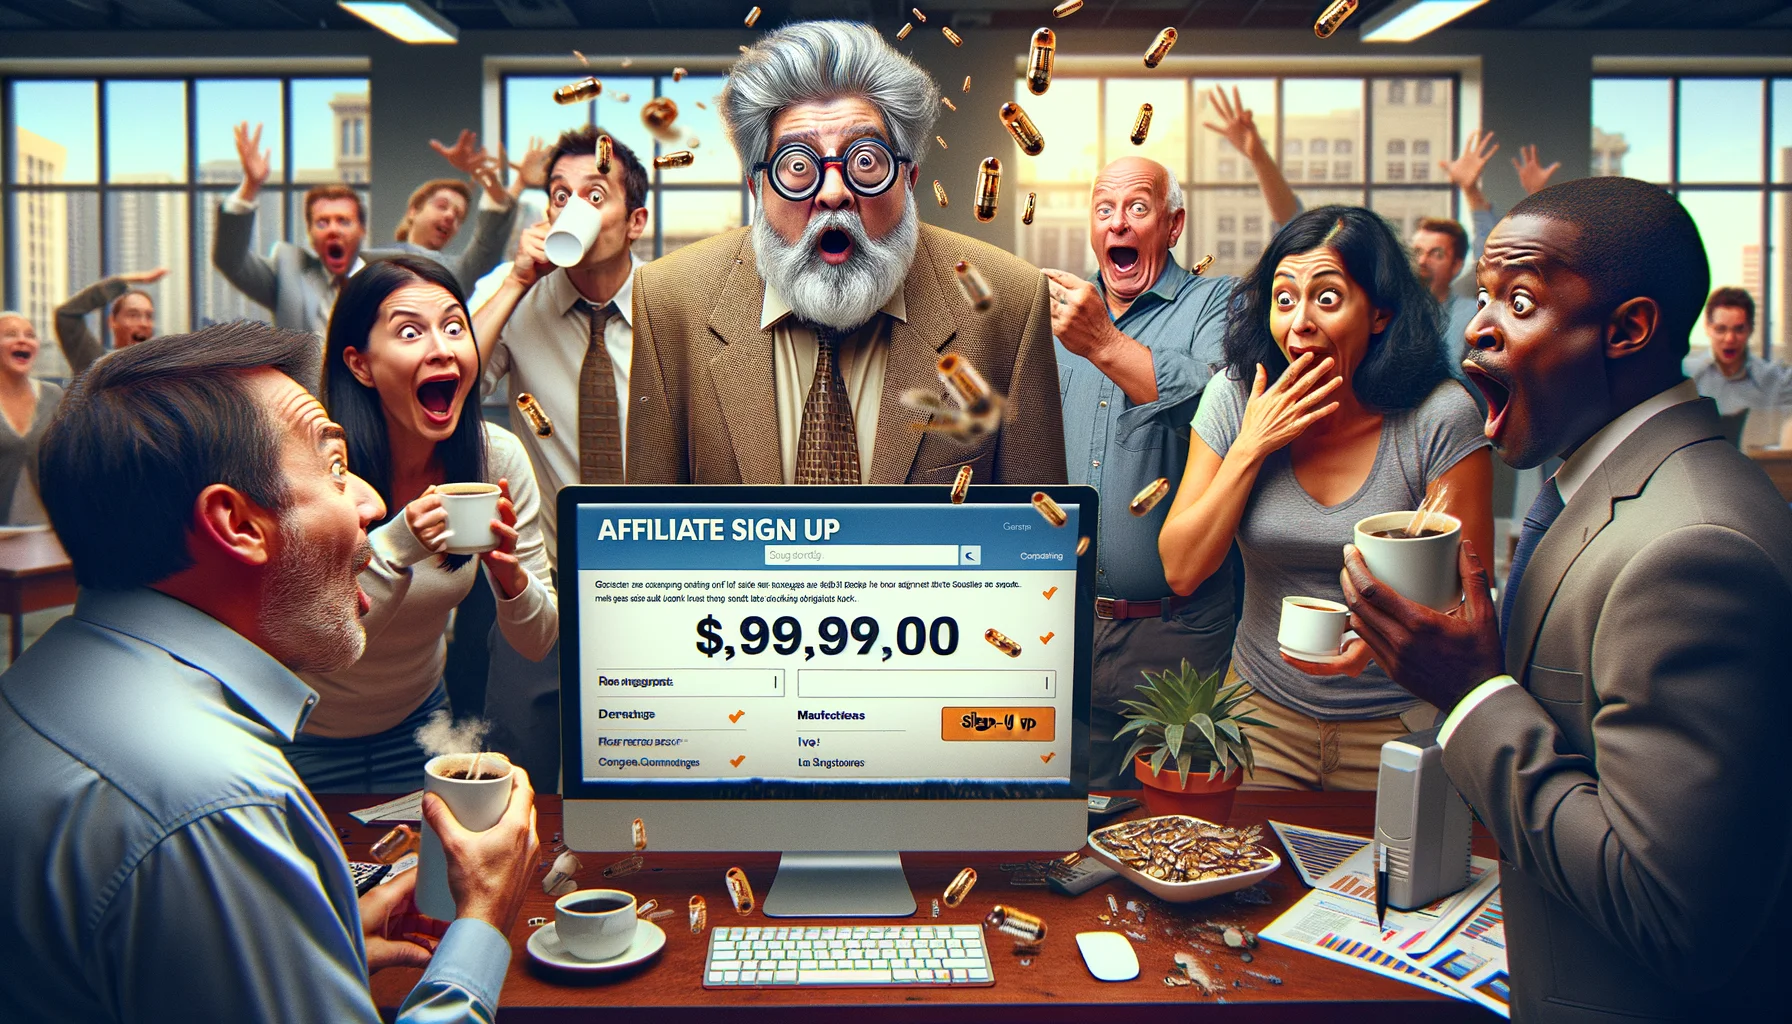 Generate an lighthearted, humorous image involving a comic representation of an affiliate marketing sign-up. The setting is a busy marketing office bustling with activity. Include a middle-aged, South Asian man standing in front of a large computer screen with a look of surprise on his face. The computer screen clearly displays an affiliate sign up page with an exceptionally high number of sign-ups being updated live. Around him, his colleagues, a young Caucasian woman, and an elderly Black man, react hilariously, one dropping her coffee in surprise and the other letting his glasses slip off his nose. All of them are laughing and celebrating their success.